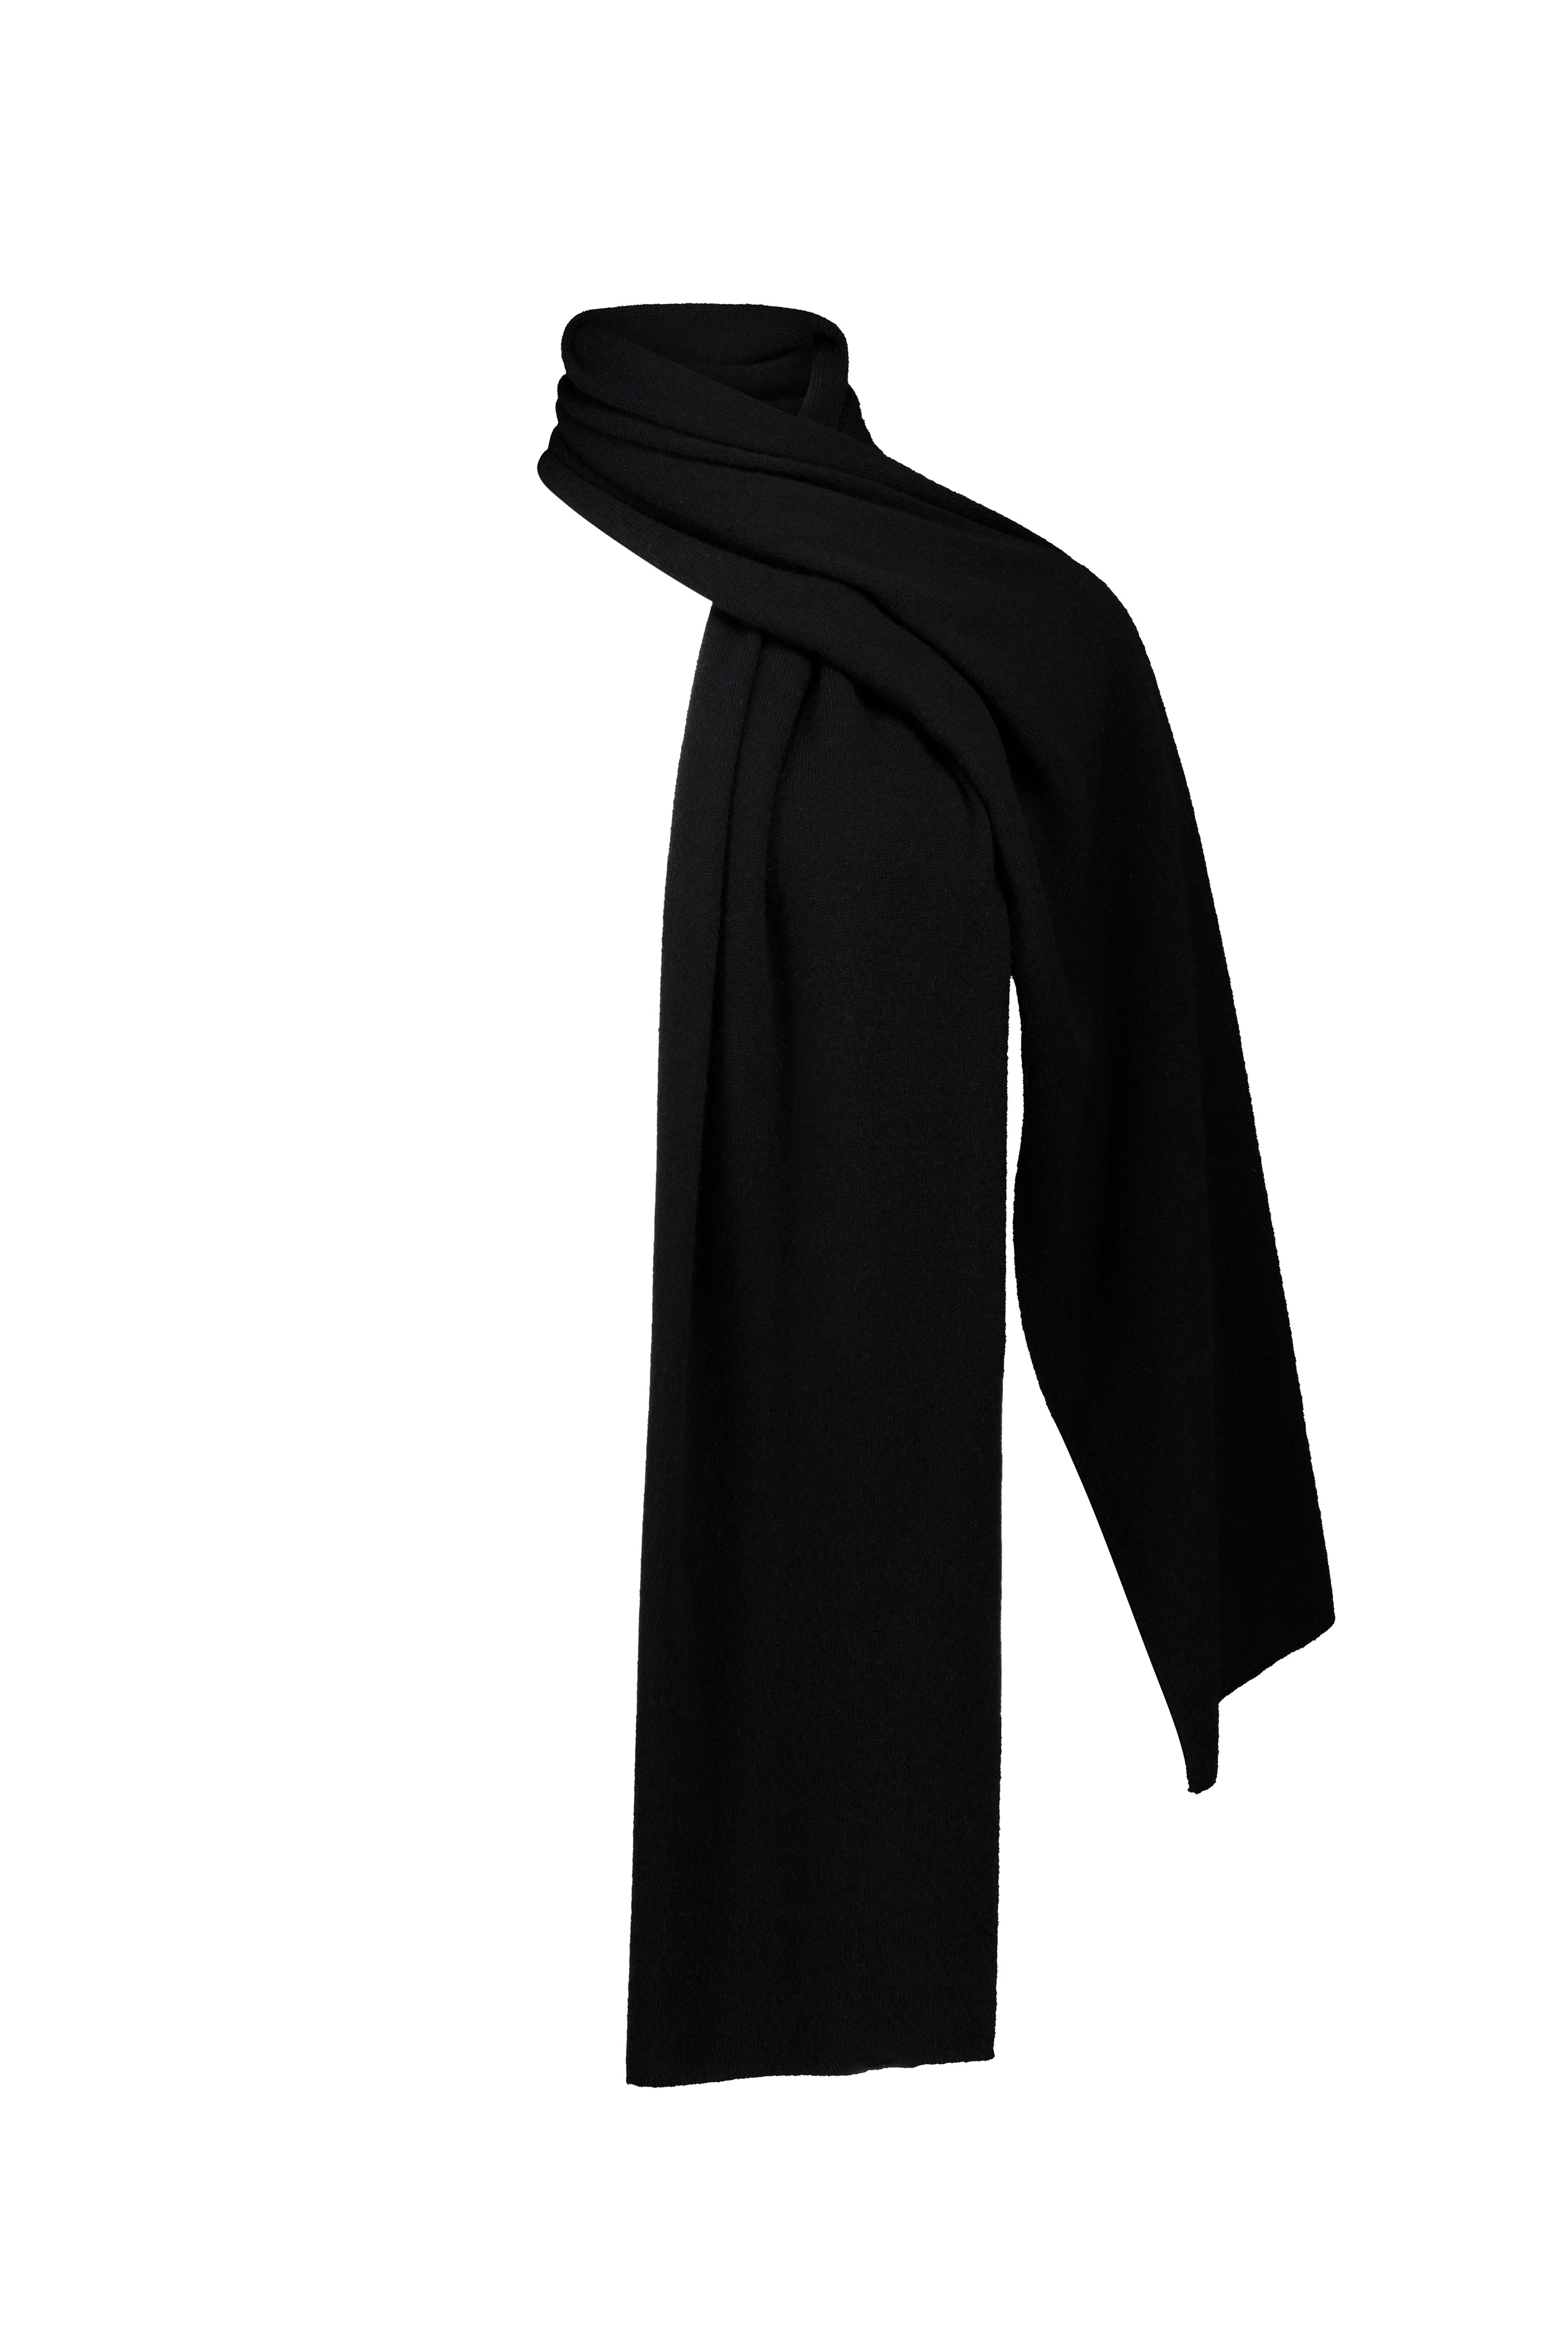 Wool Cashmere Anywhere Wrap